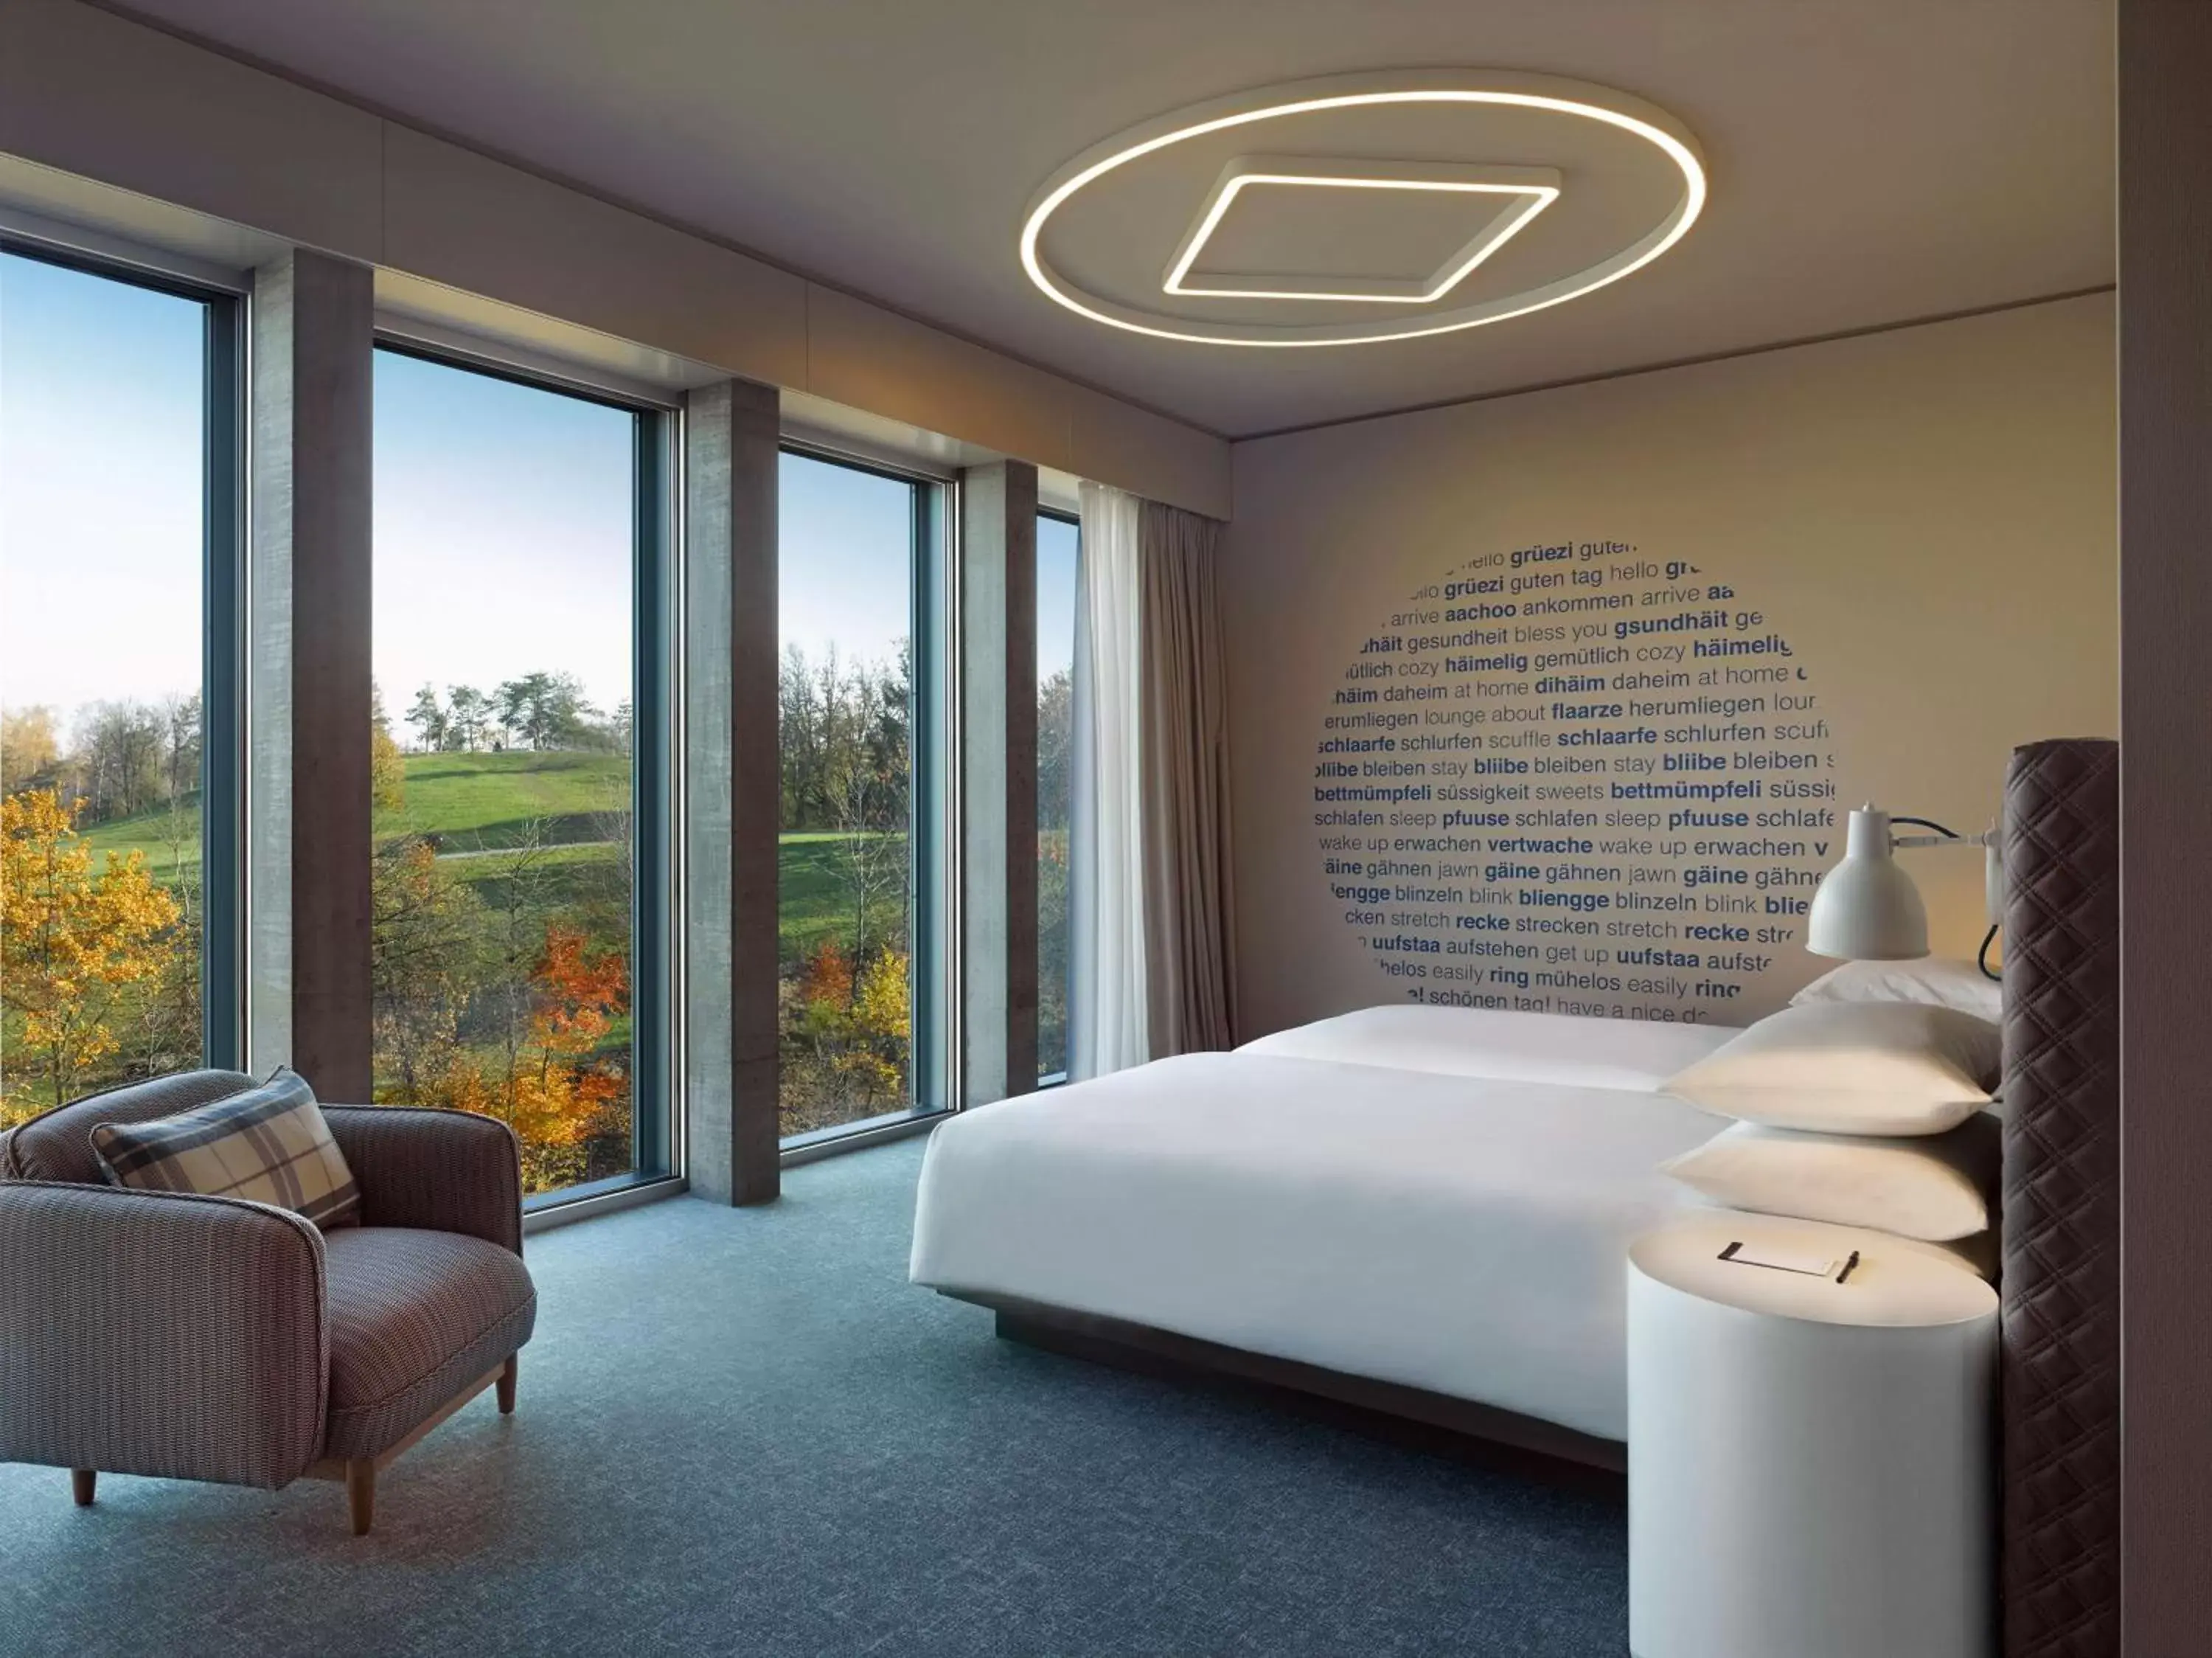 Bed in Hyatt Place Zurich Airport the Circle